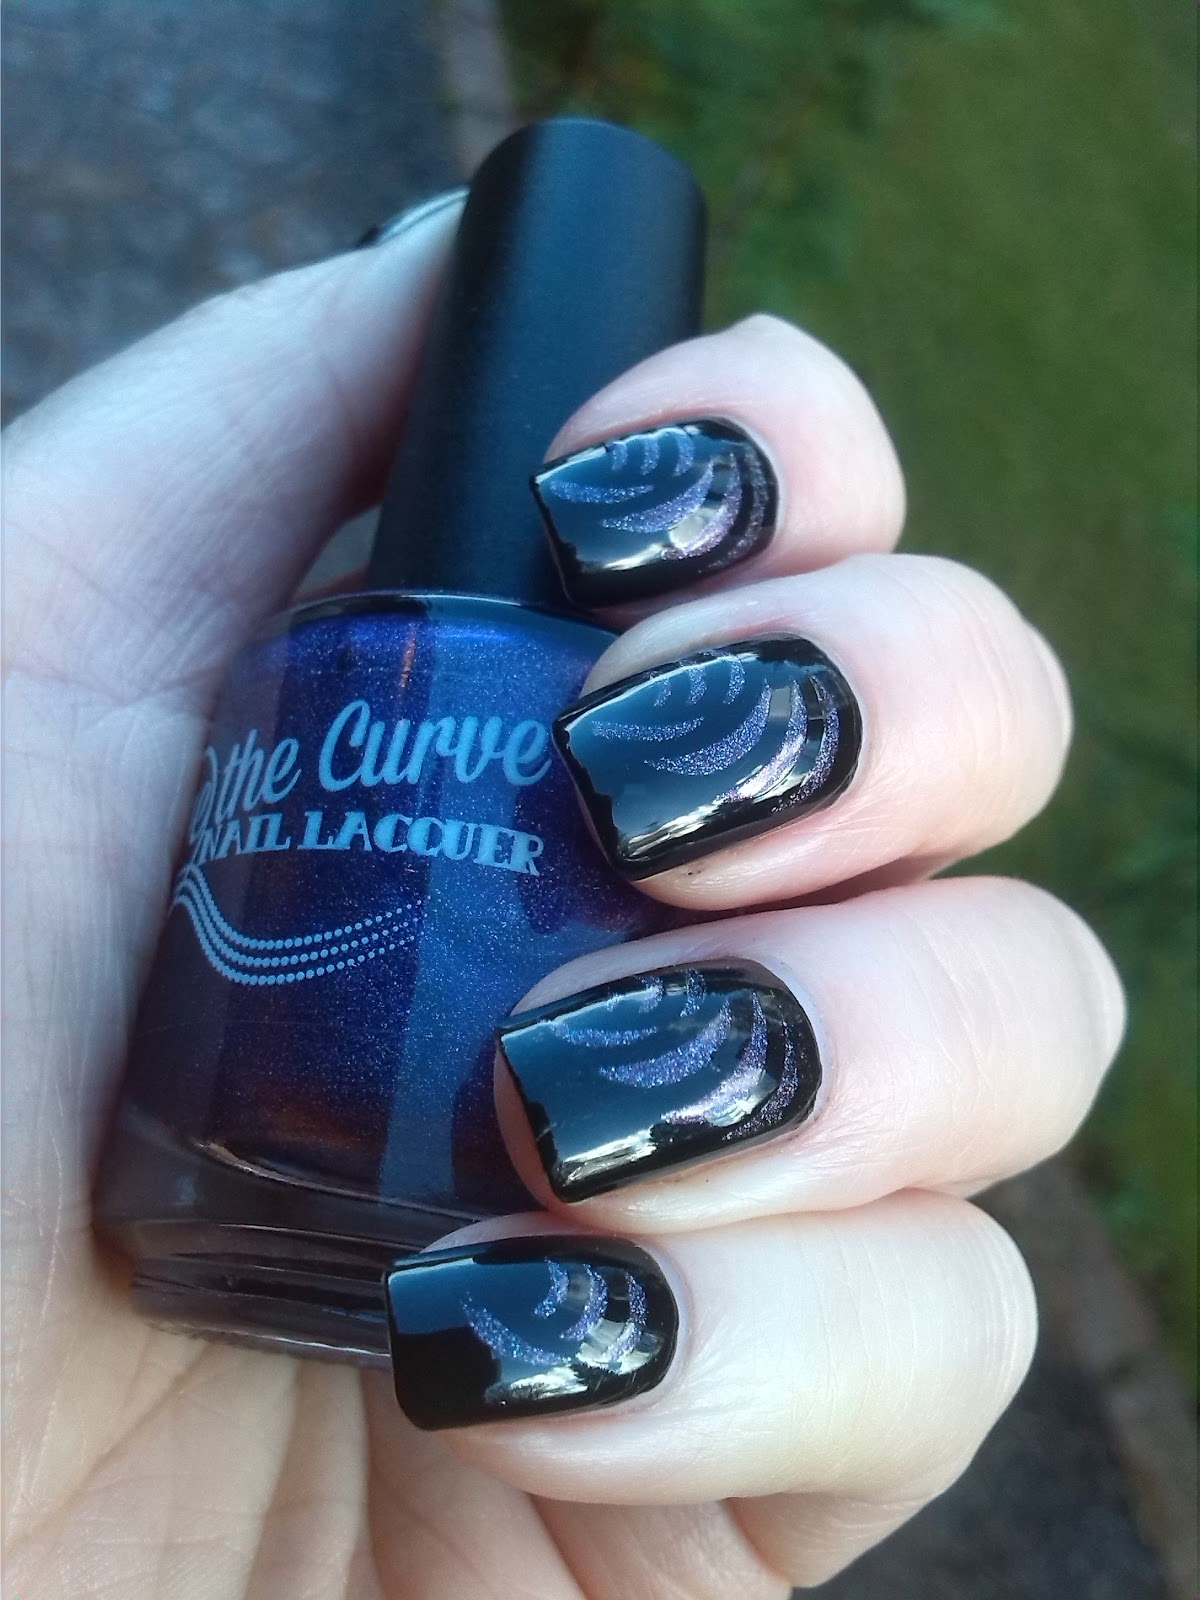 Above the Curve Relative Dimensions and  Smart nail art stencil P057